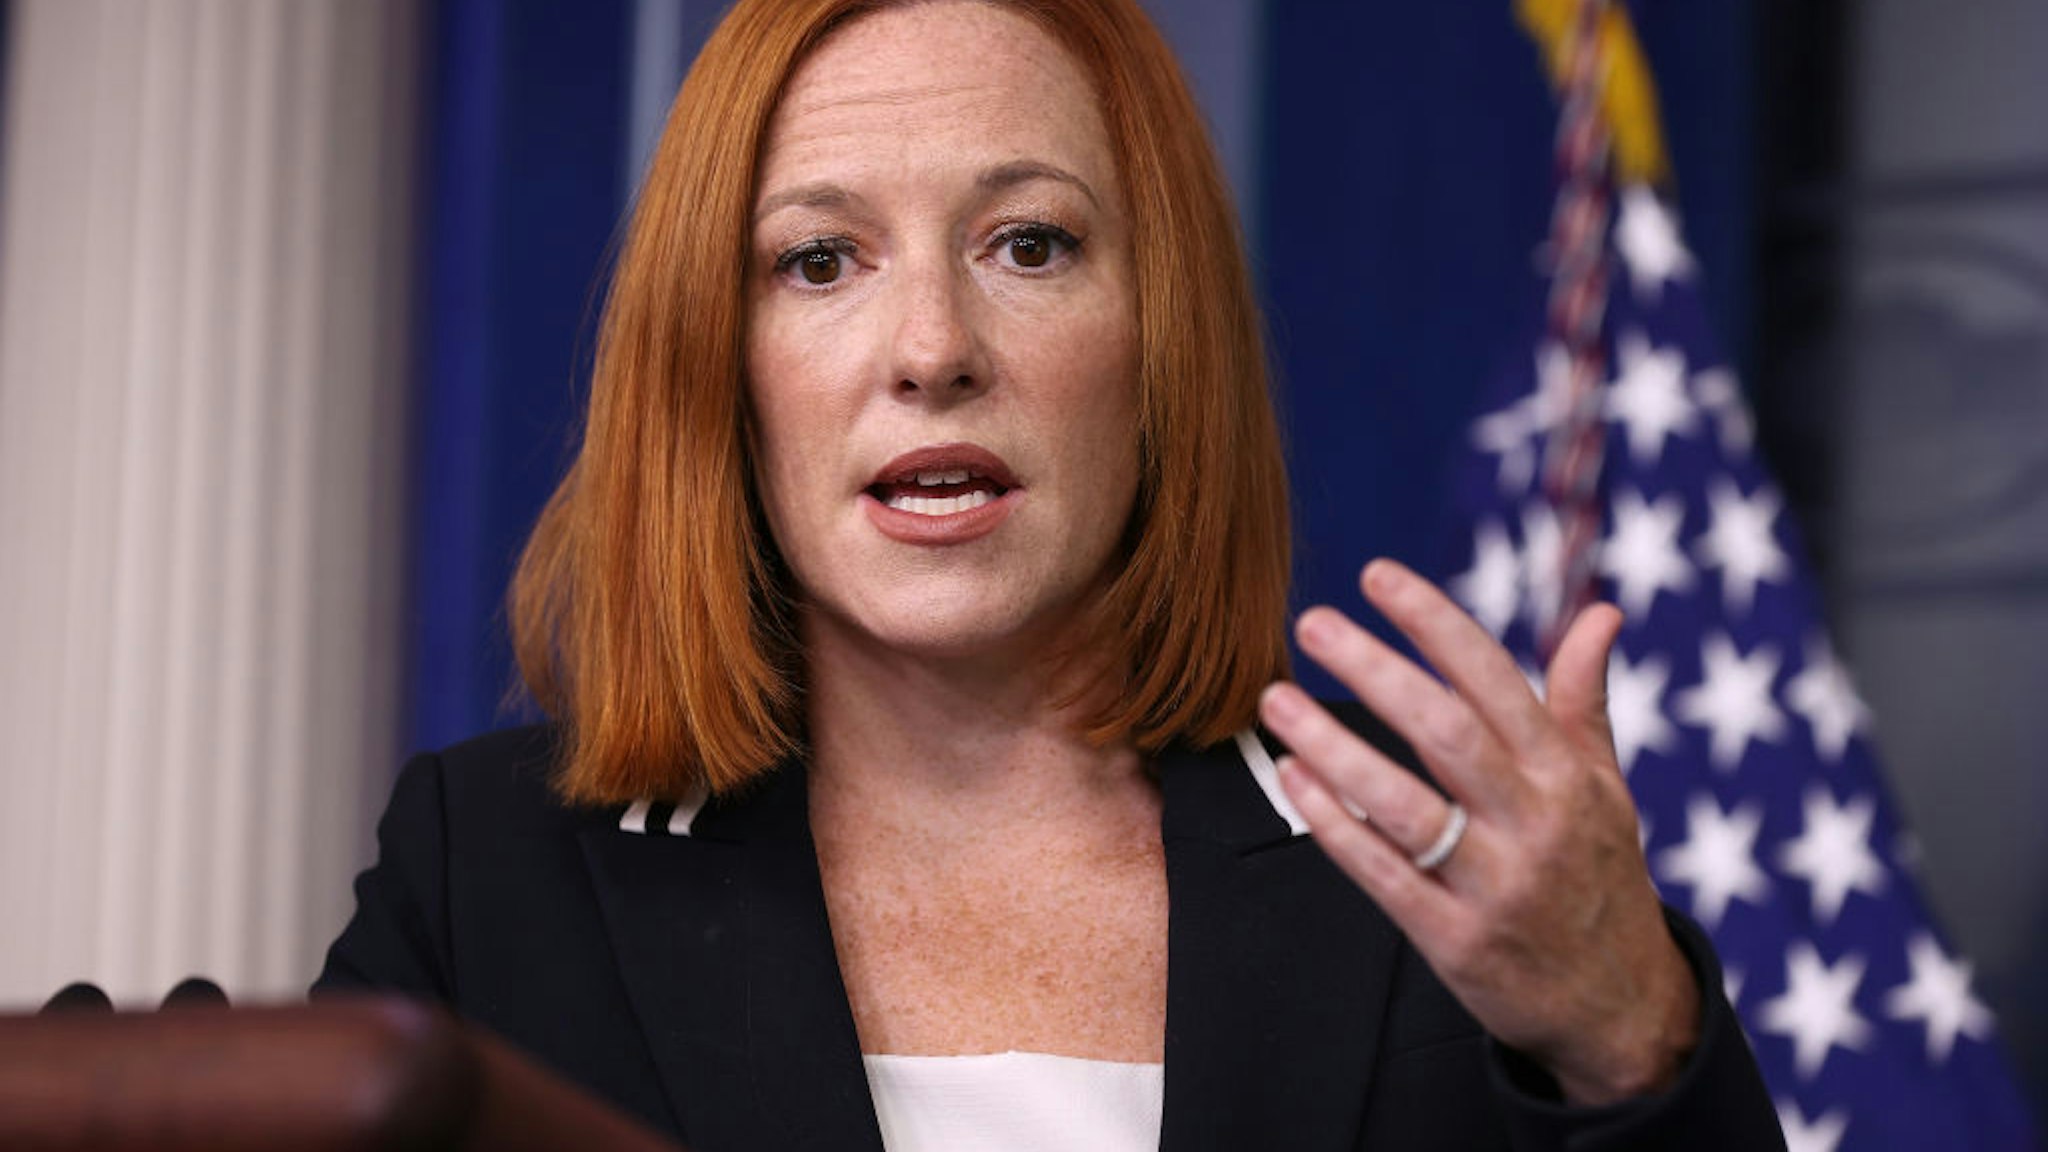 WASHINGTON, DC - SEPTEMBER 02: White House Press Secretary Jen Psaki talks to reporters during the daily news conference in the Brady Press Briefing Room at the White House on September 02, 2021 in Washington, DC. Psaki answered questions about the ongoing federal response to Hurricane Ida, the Supreme Court's decision on a new Texas anti-abortion law, Afghan refugees in the United States and other topics. (Photo by Chip Somodevilla/Getty Images)